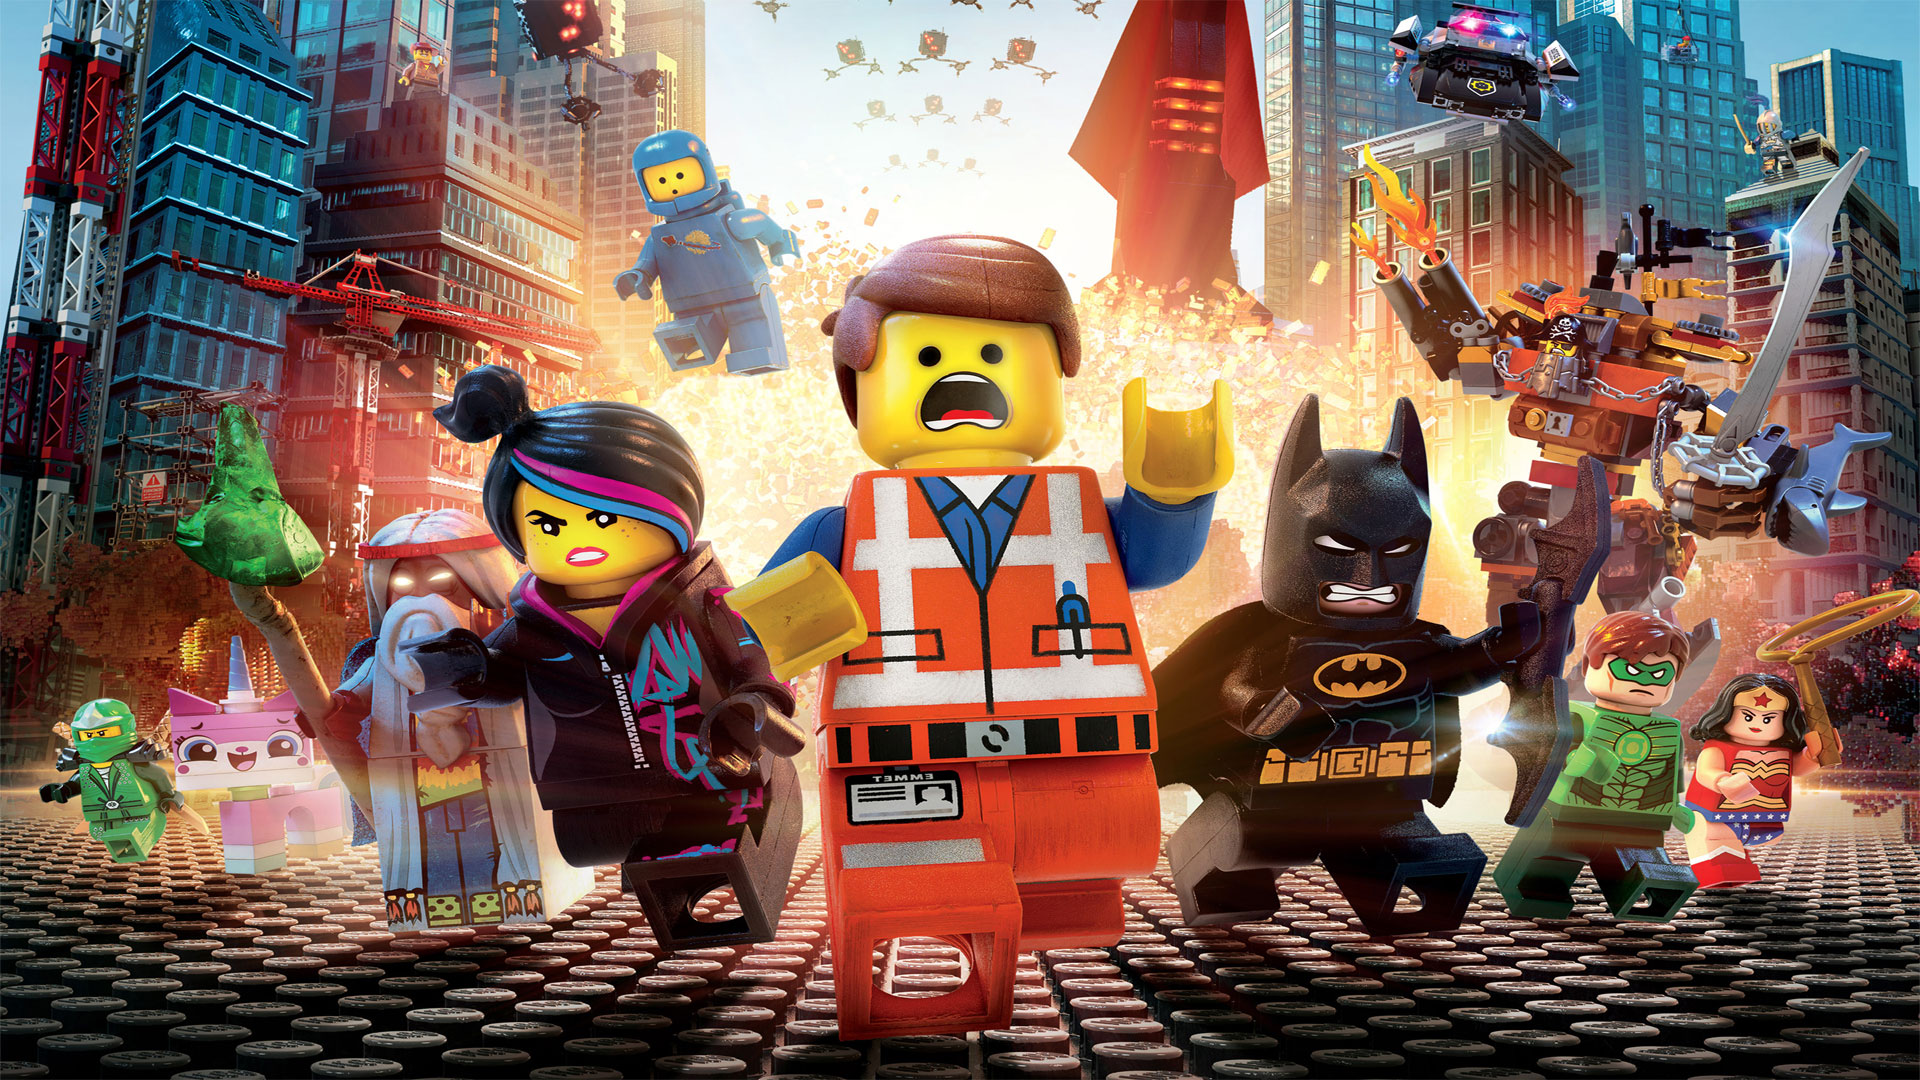 Lego Movie Backgrounds Download HD Wallpapers 1920x1080